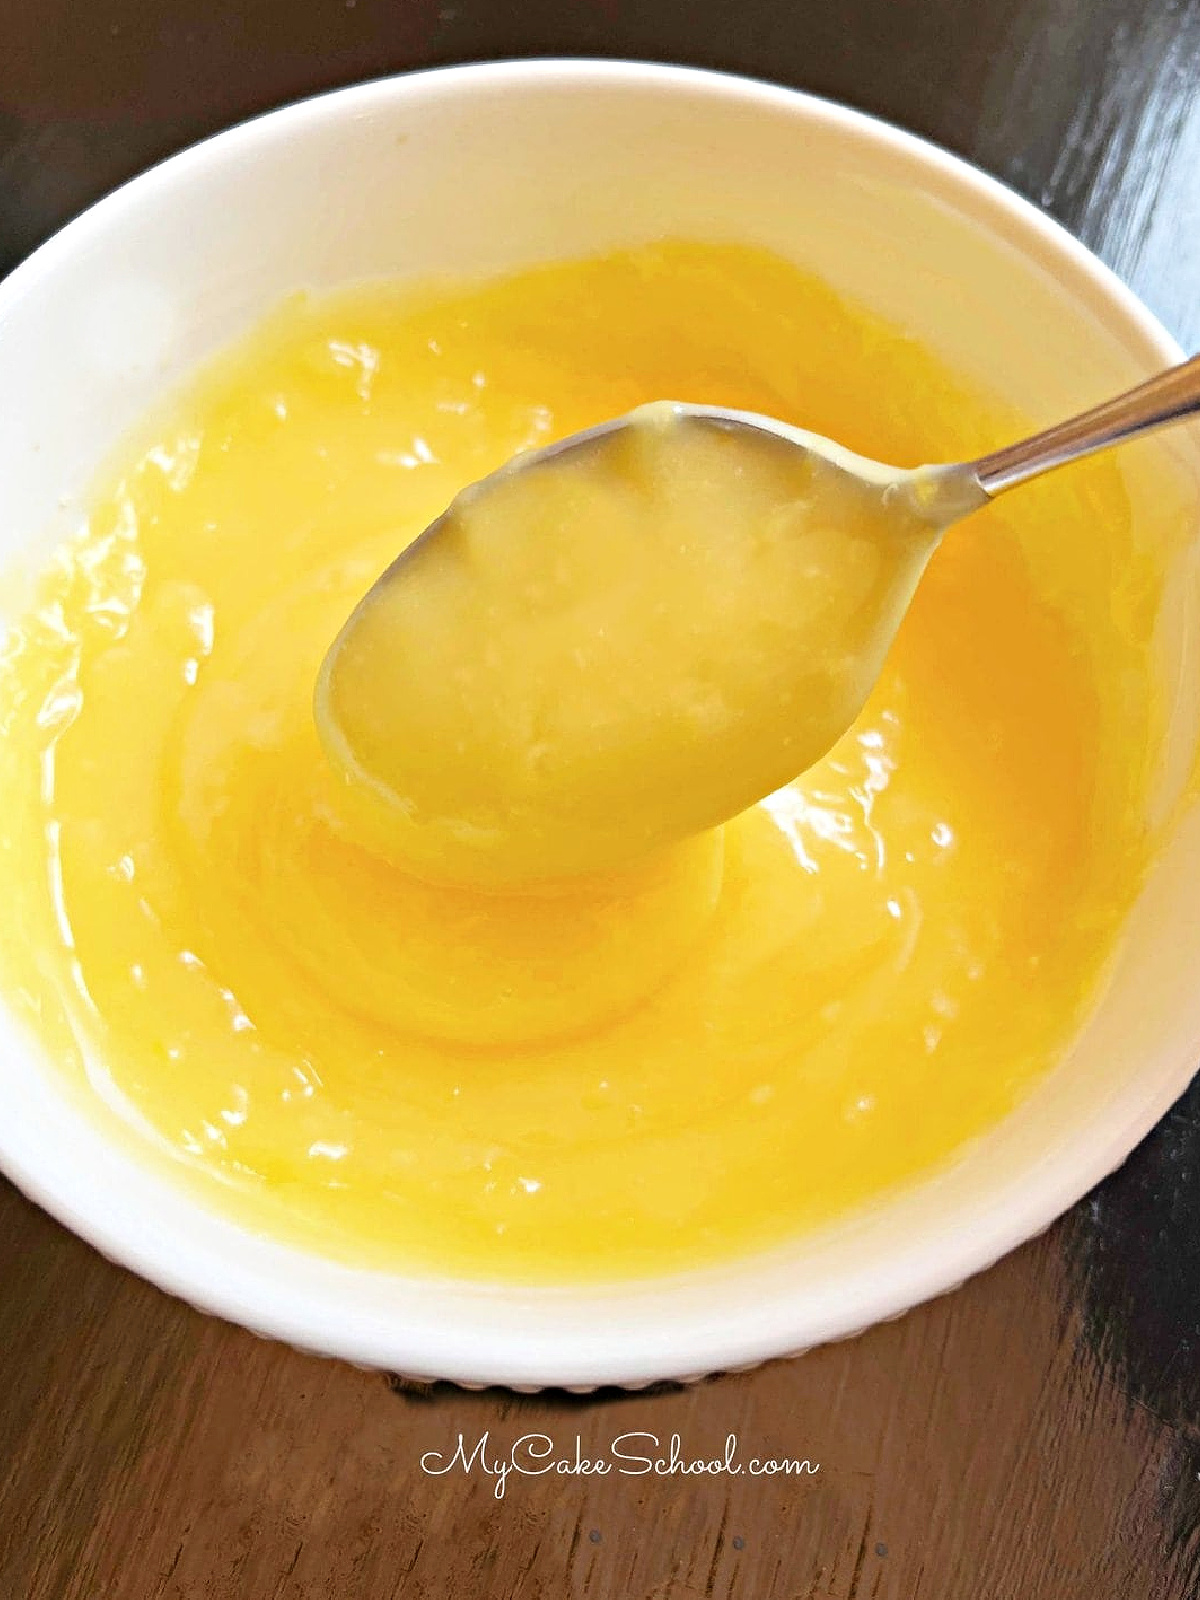 Bowl of Lemon Curd with a spoon.